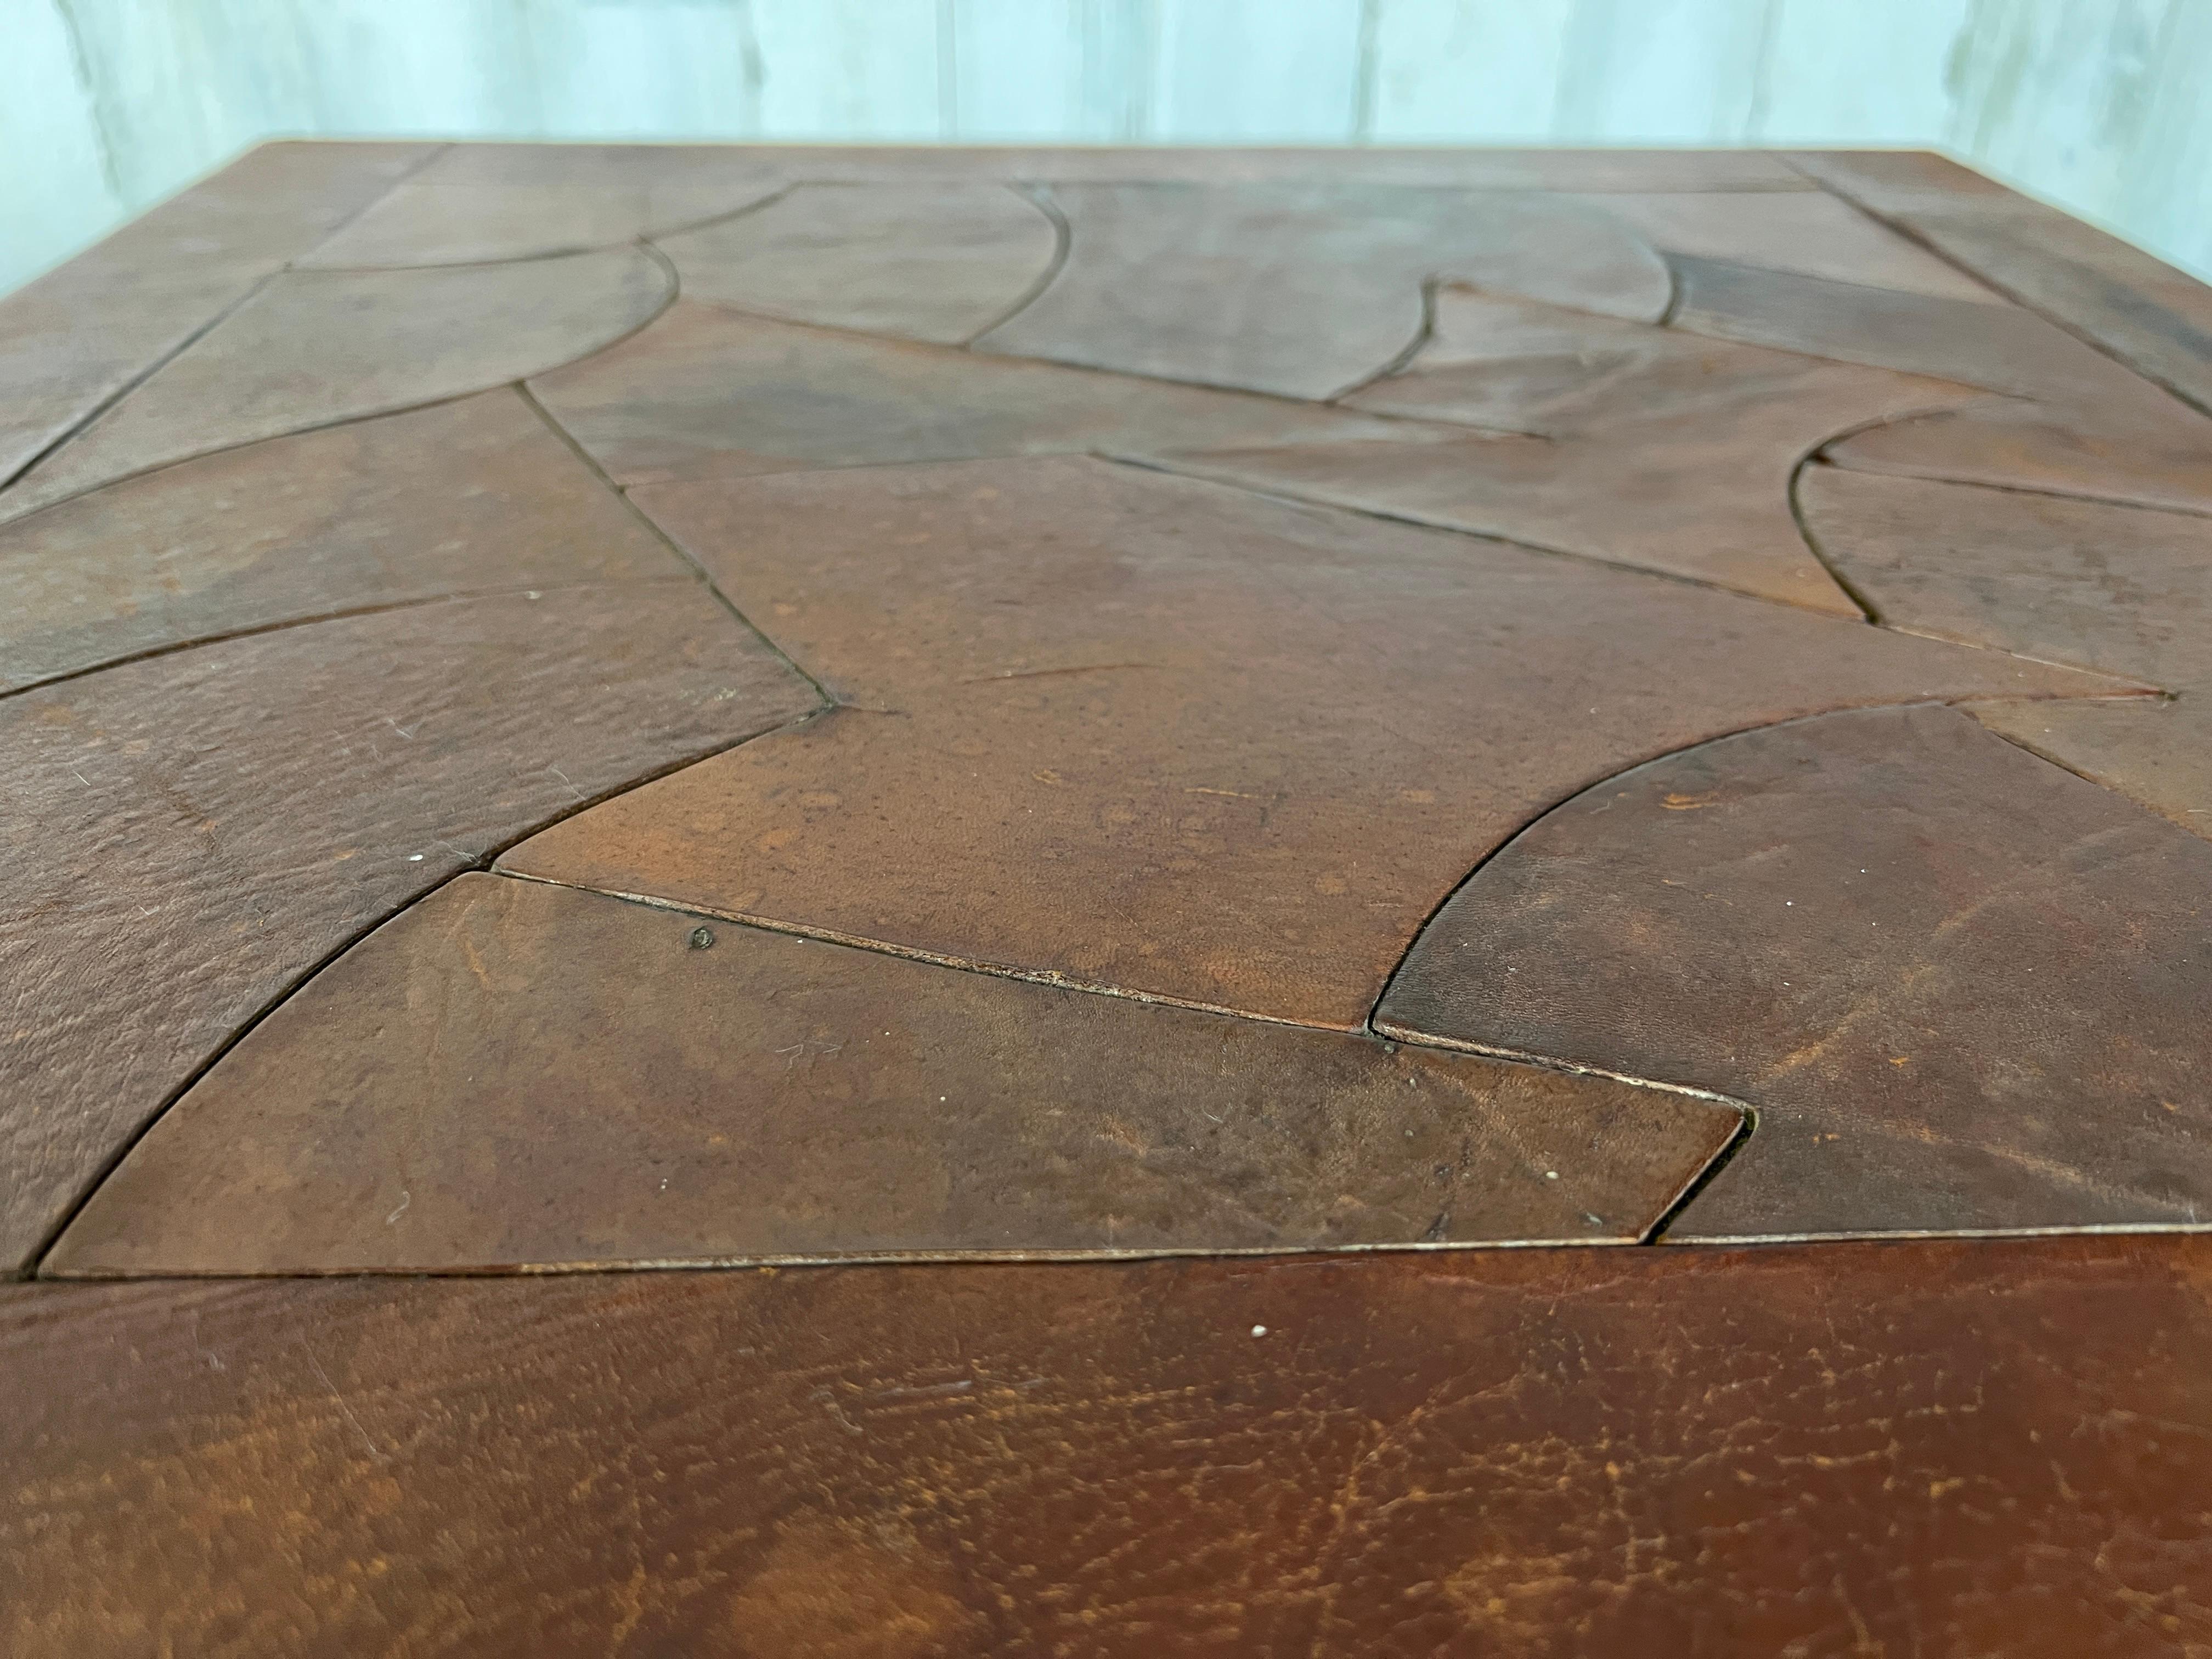 Abstract Leather Top End Tables by 